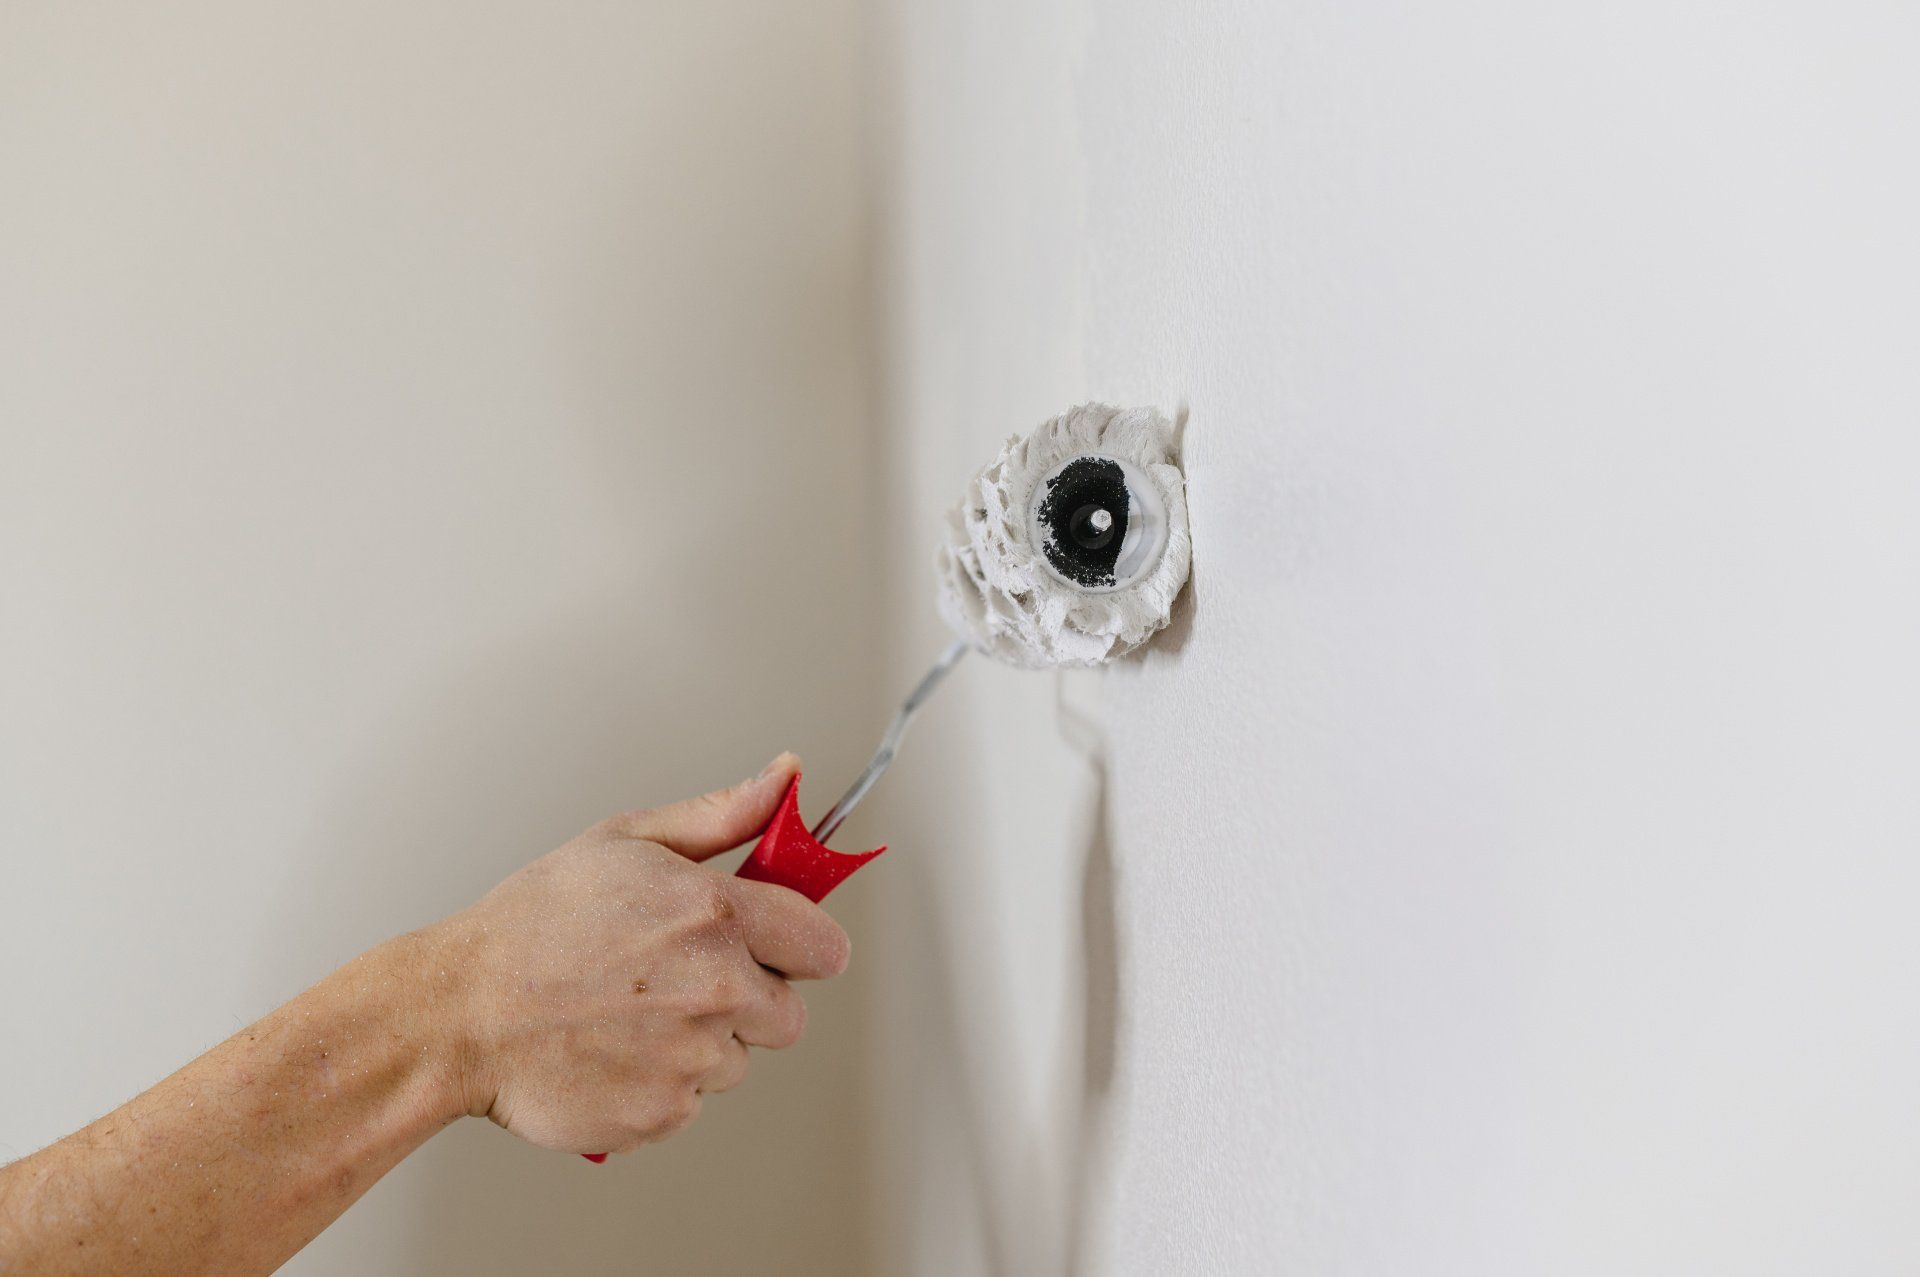 A close-up view of a hand holding a paint roller and applying paint to an interior wall.